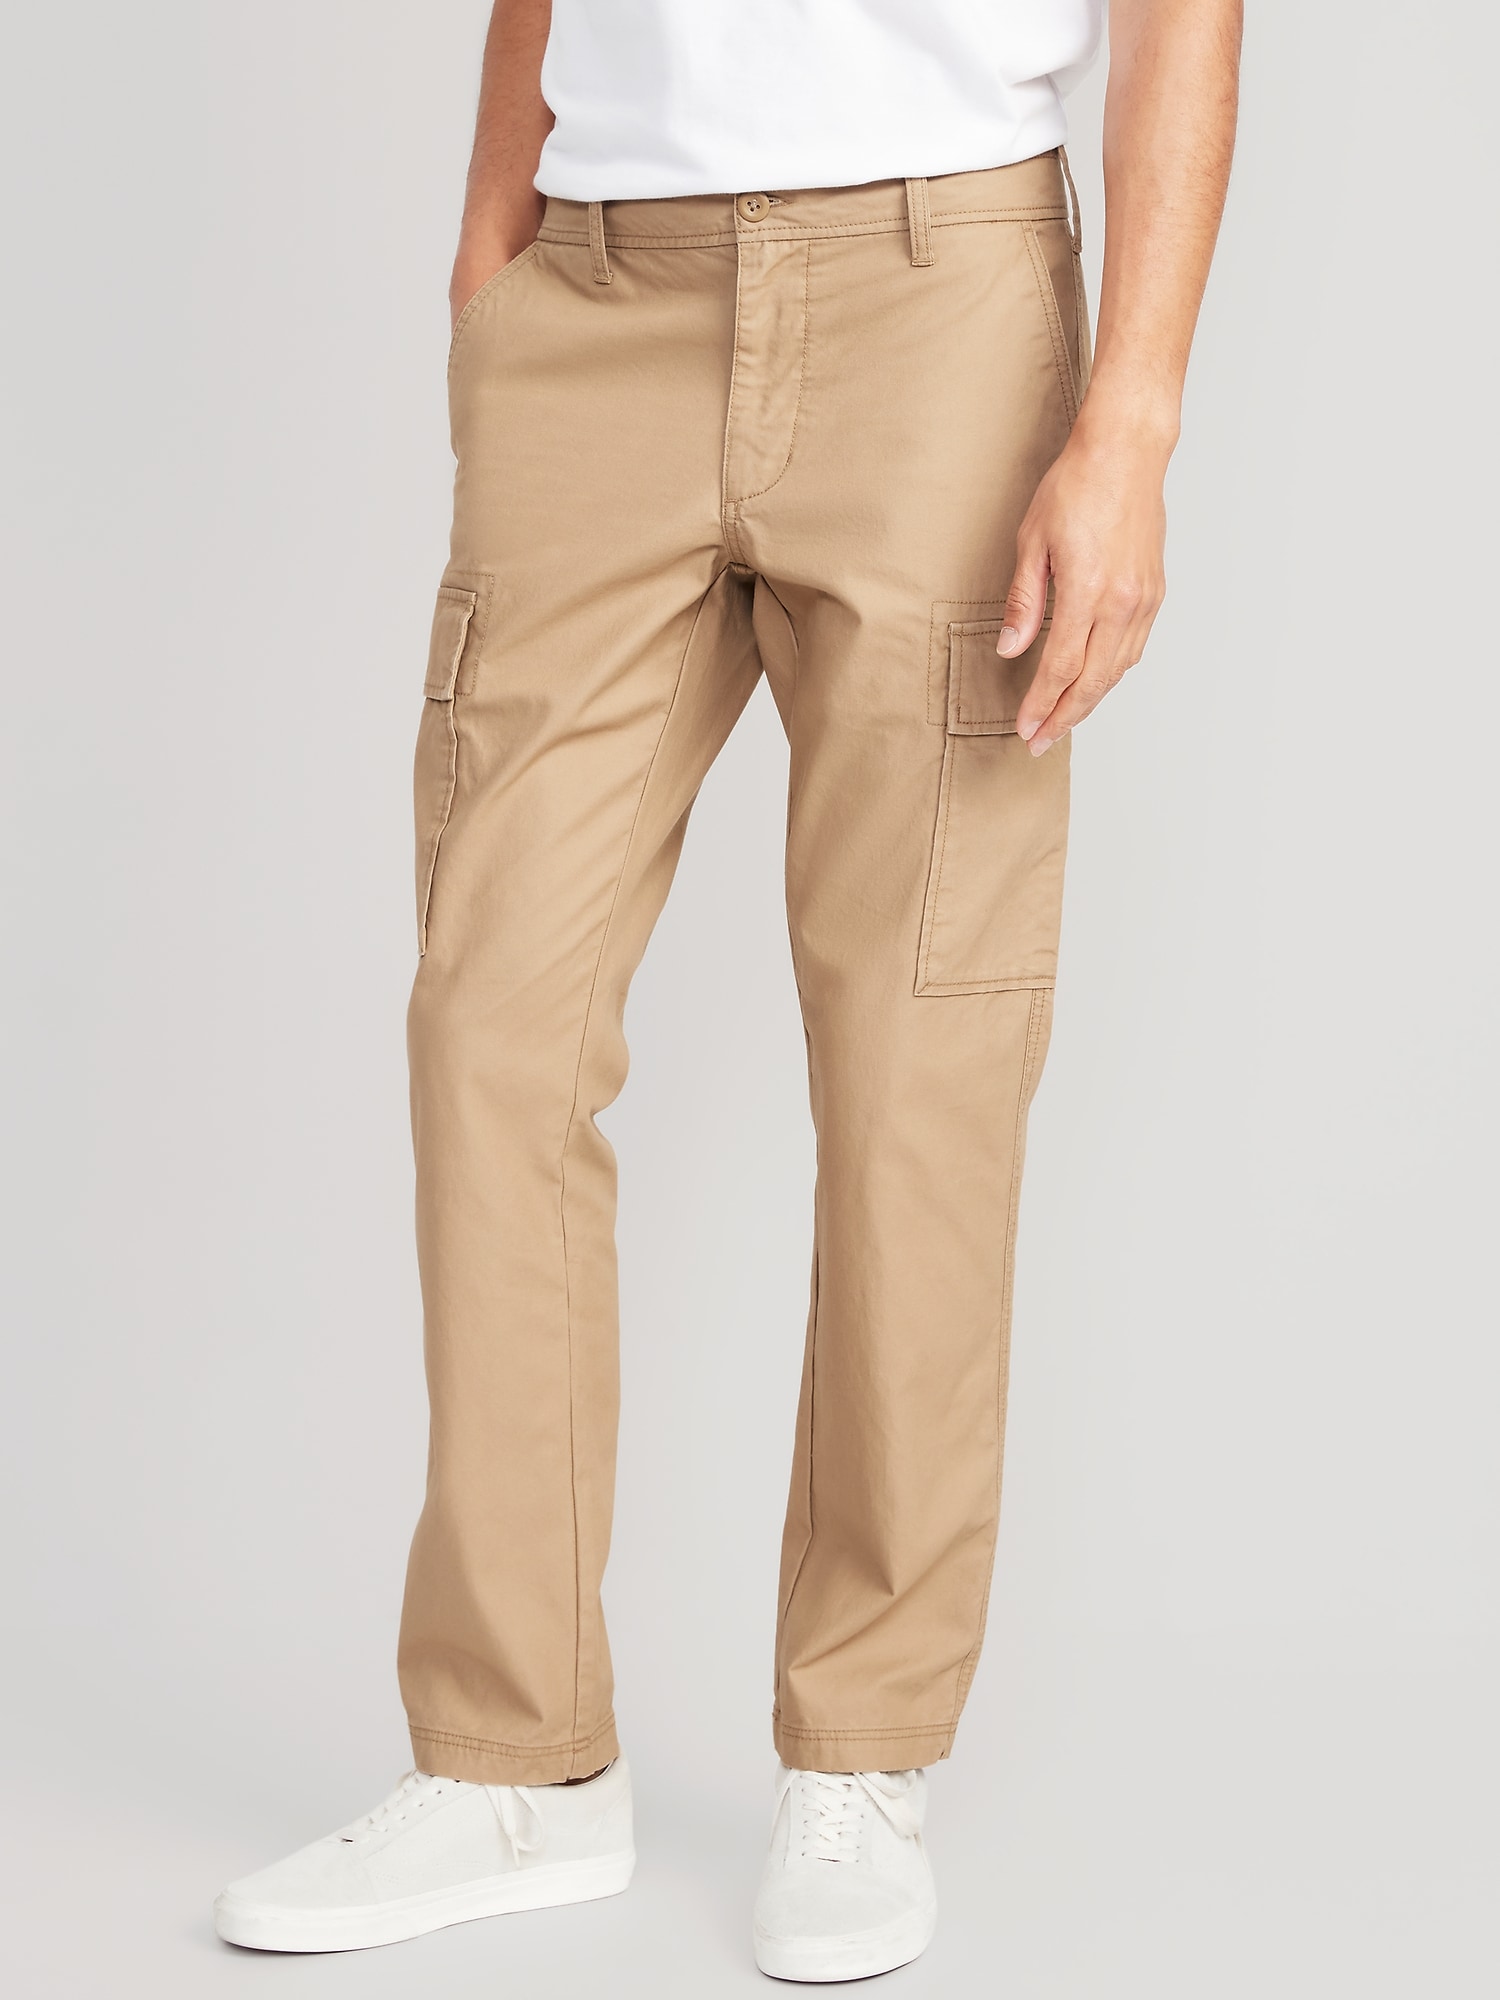 Stretch Twill Slim-Fit Cargo Pants for Tall Men in Russet Brown 30 / 36 / Russet Brown